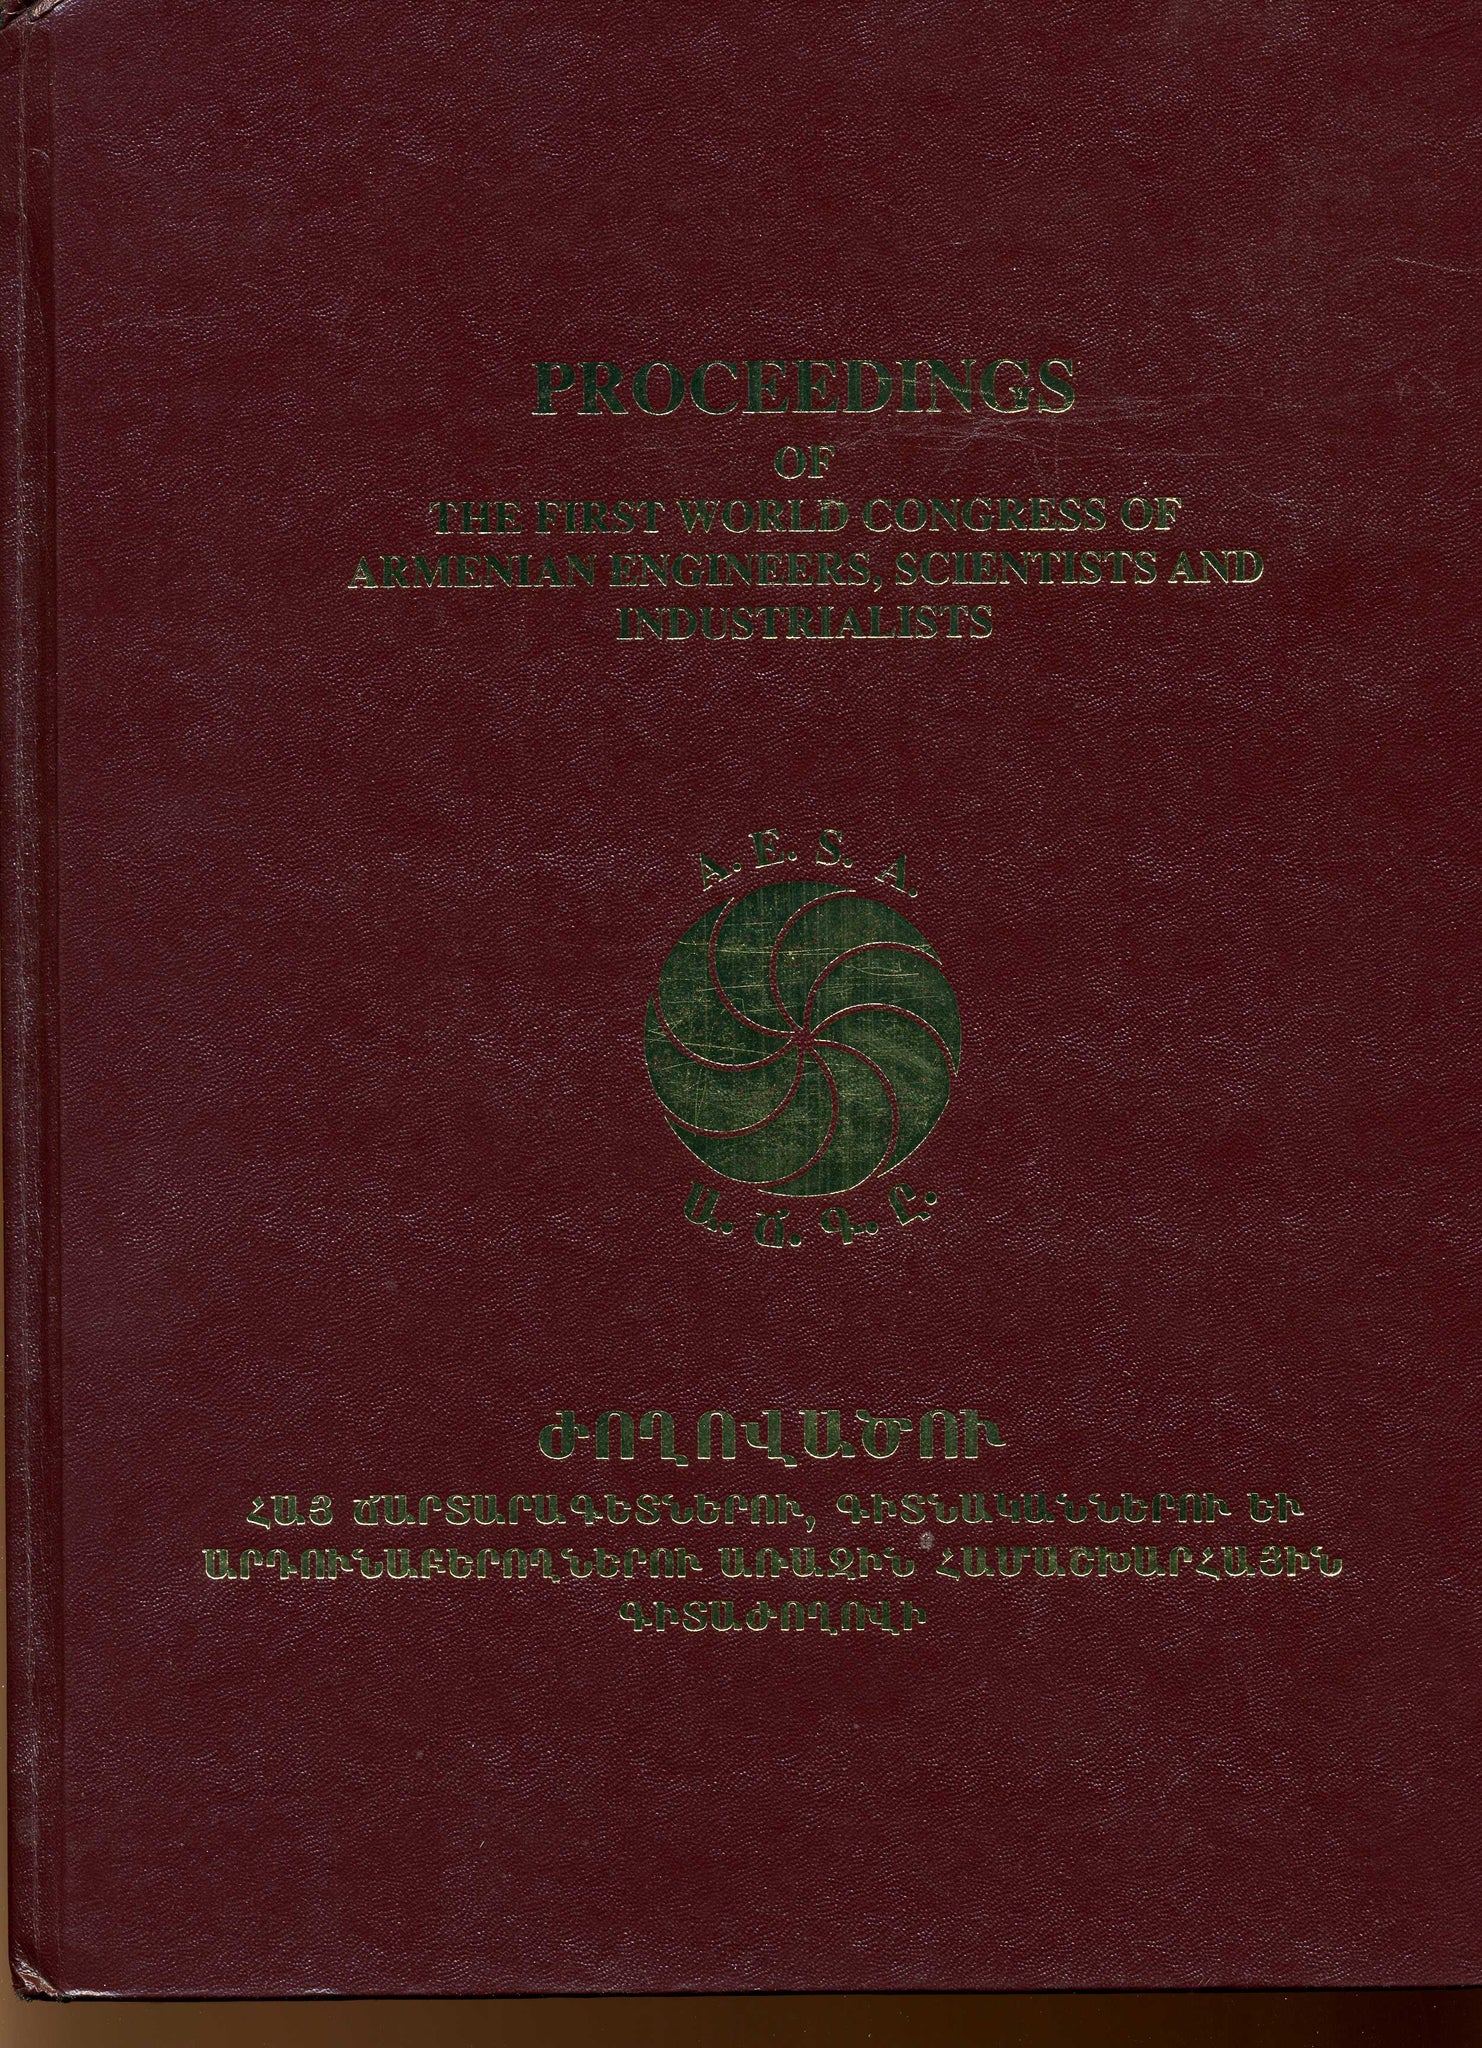 PROCEEDINGS OF THE FIRST WORLD CONGRESS OF ARMENIAN ENGINEERS, SCIENTISTS AND INDUSTRIALISTS